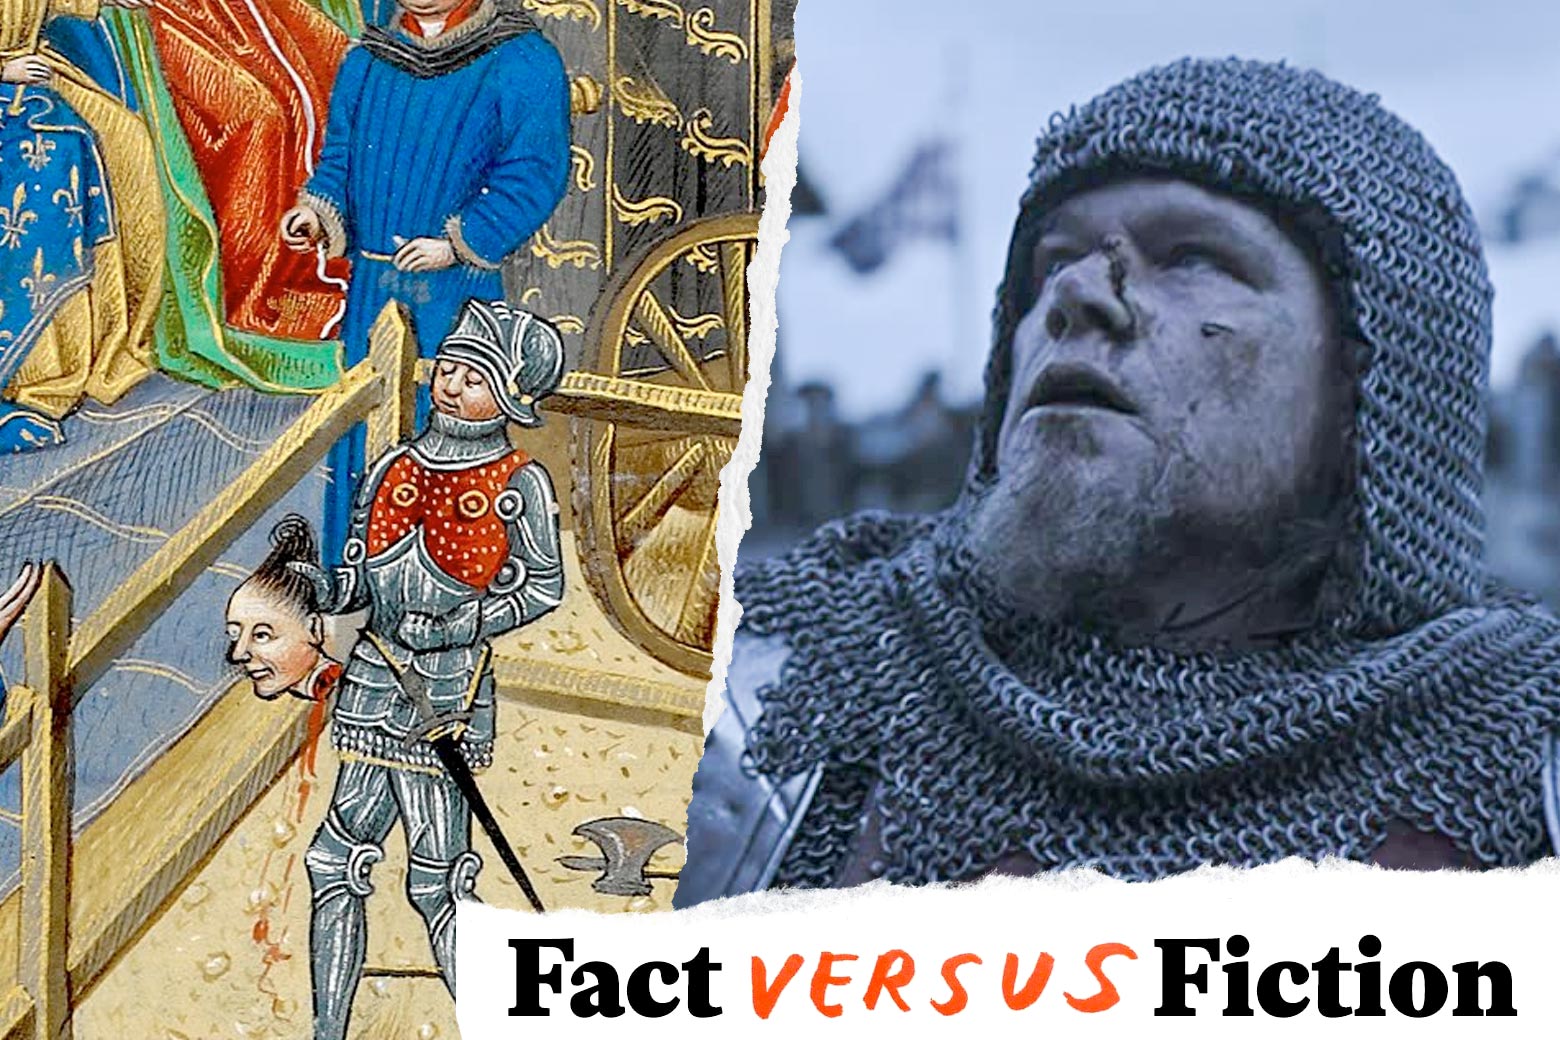 At left: A medieval illustration shows a knight holding up a man's decapitated head. At right: Matt Damon in knight's garb in the film.